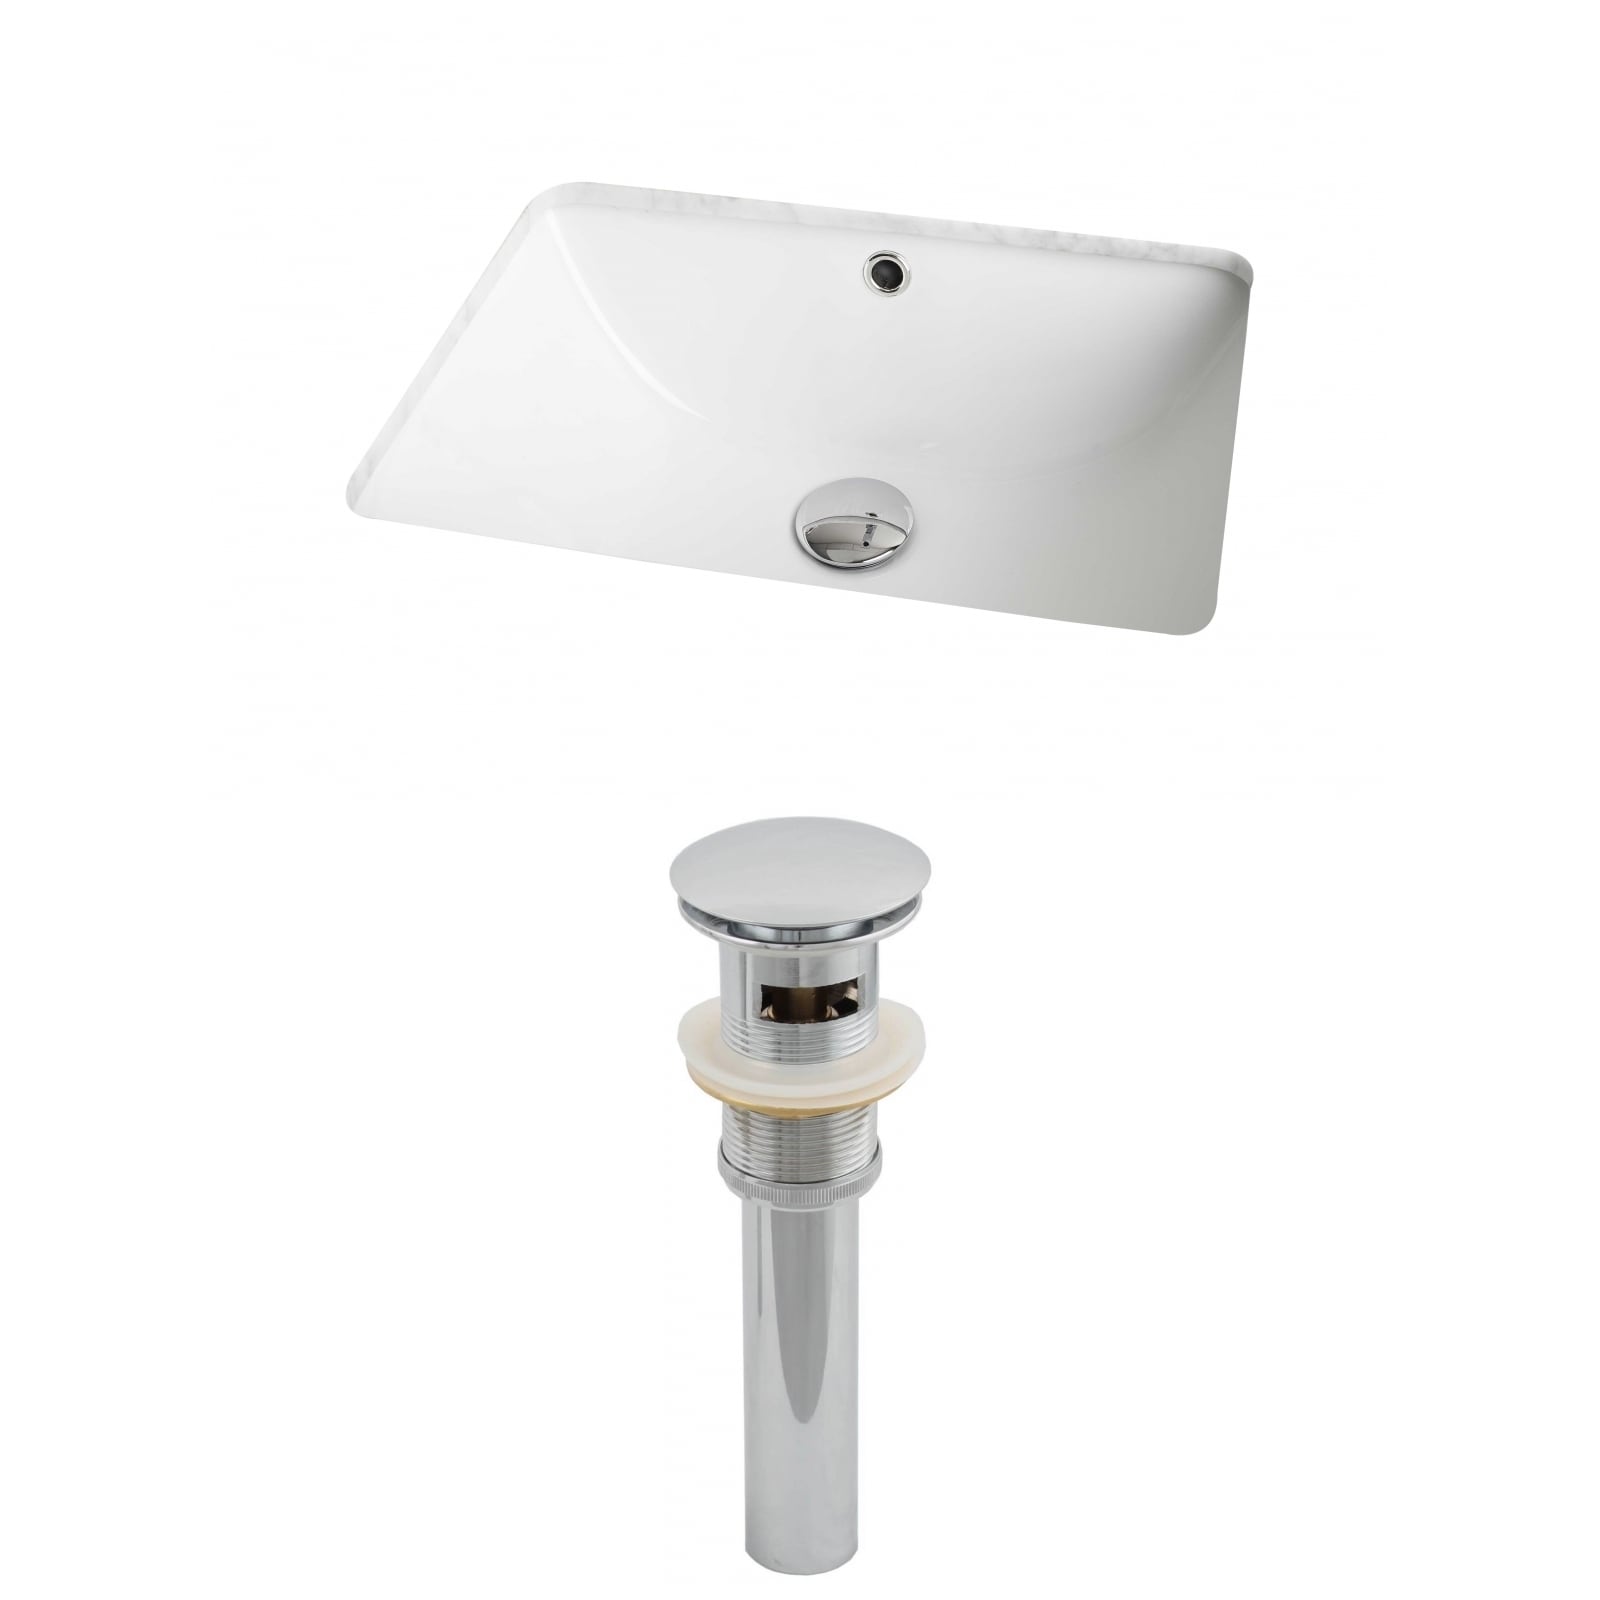 https://ak1.ostkcdn.com/images/products/12054632/18.25-in.-W-x-13.5-in.-D-Rectangle-Undermount-Sink-Set-In-White-And-Drain-db82f7e7-9f41-45dd-bac9-33e7b5a1490e.jpg